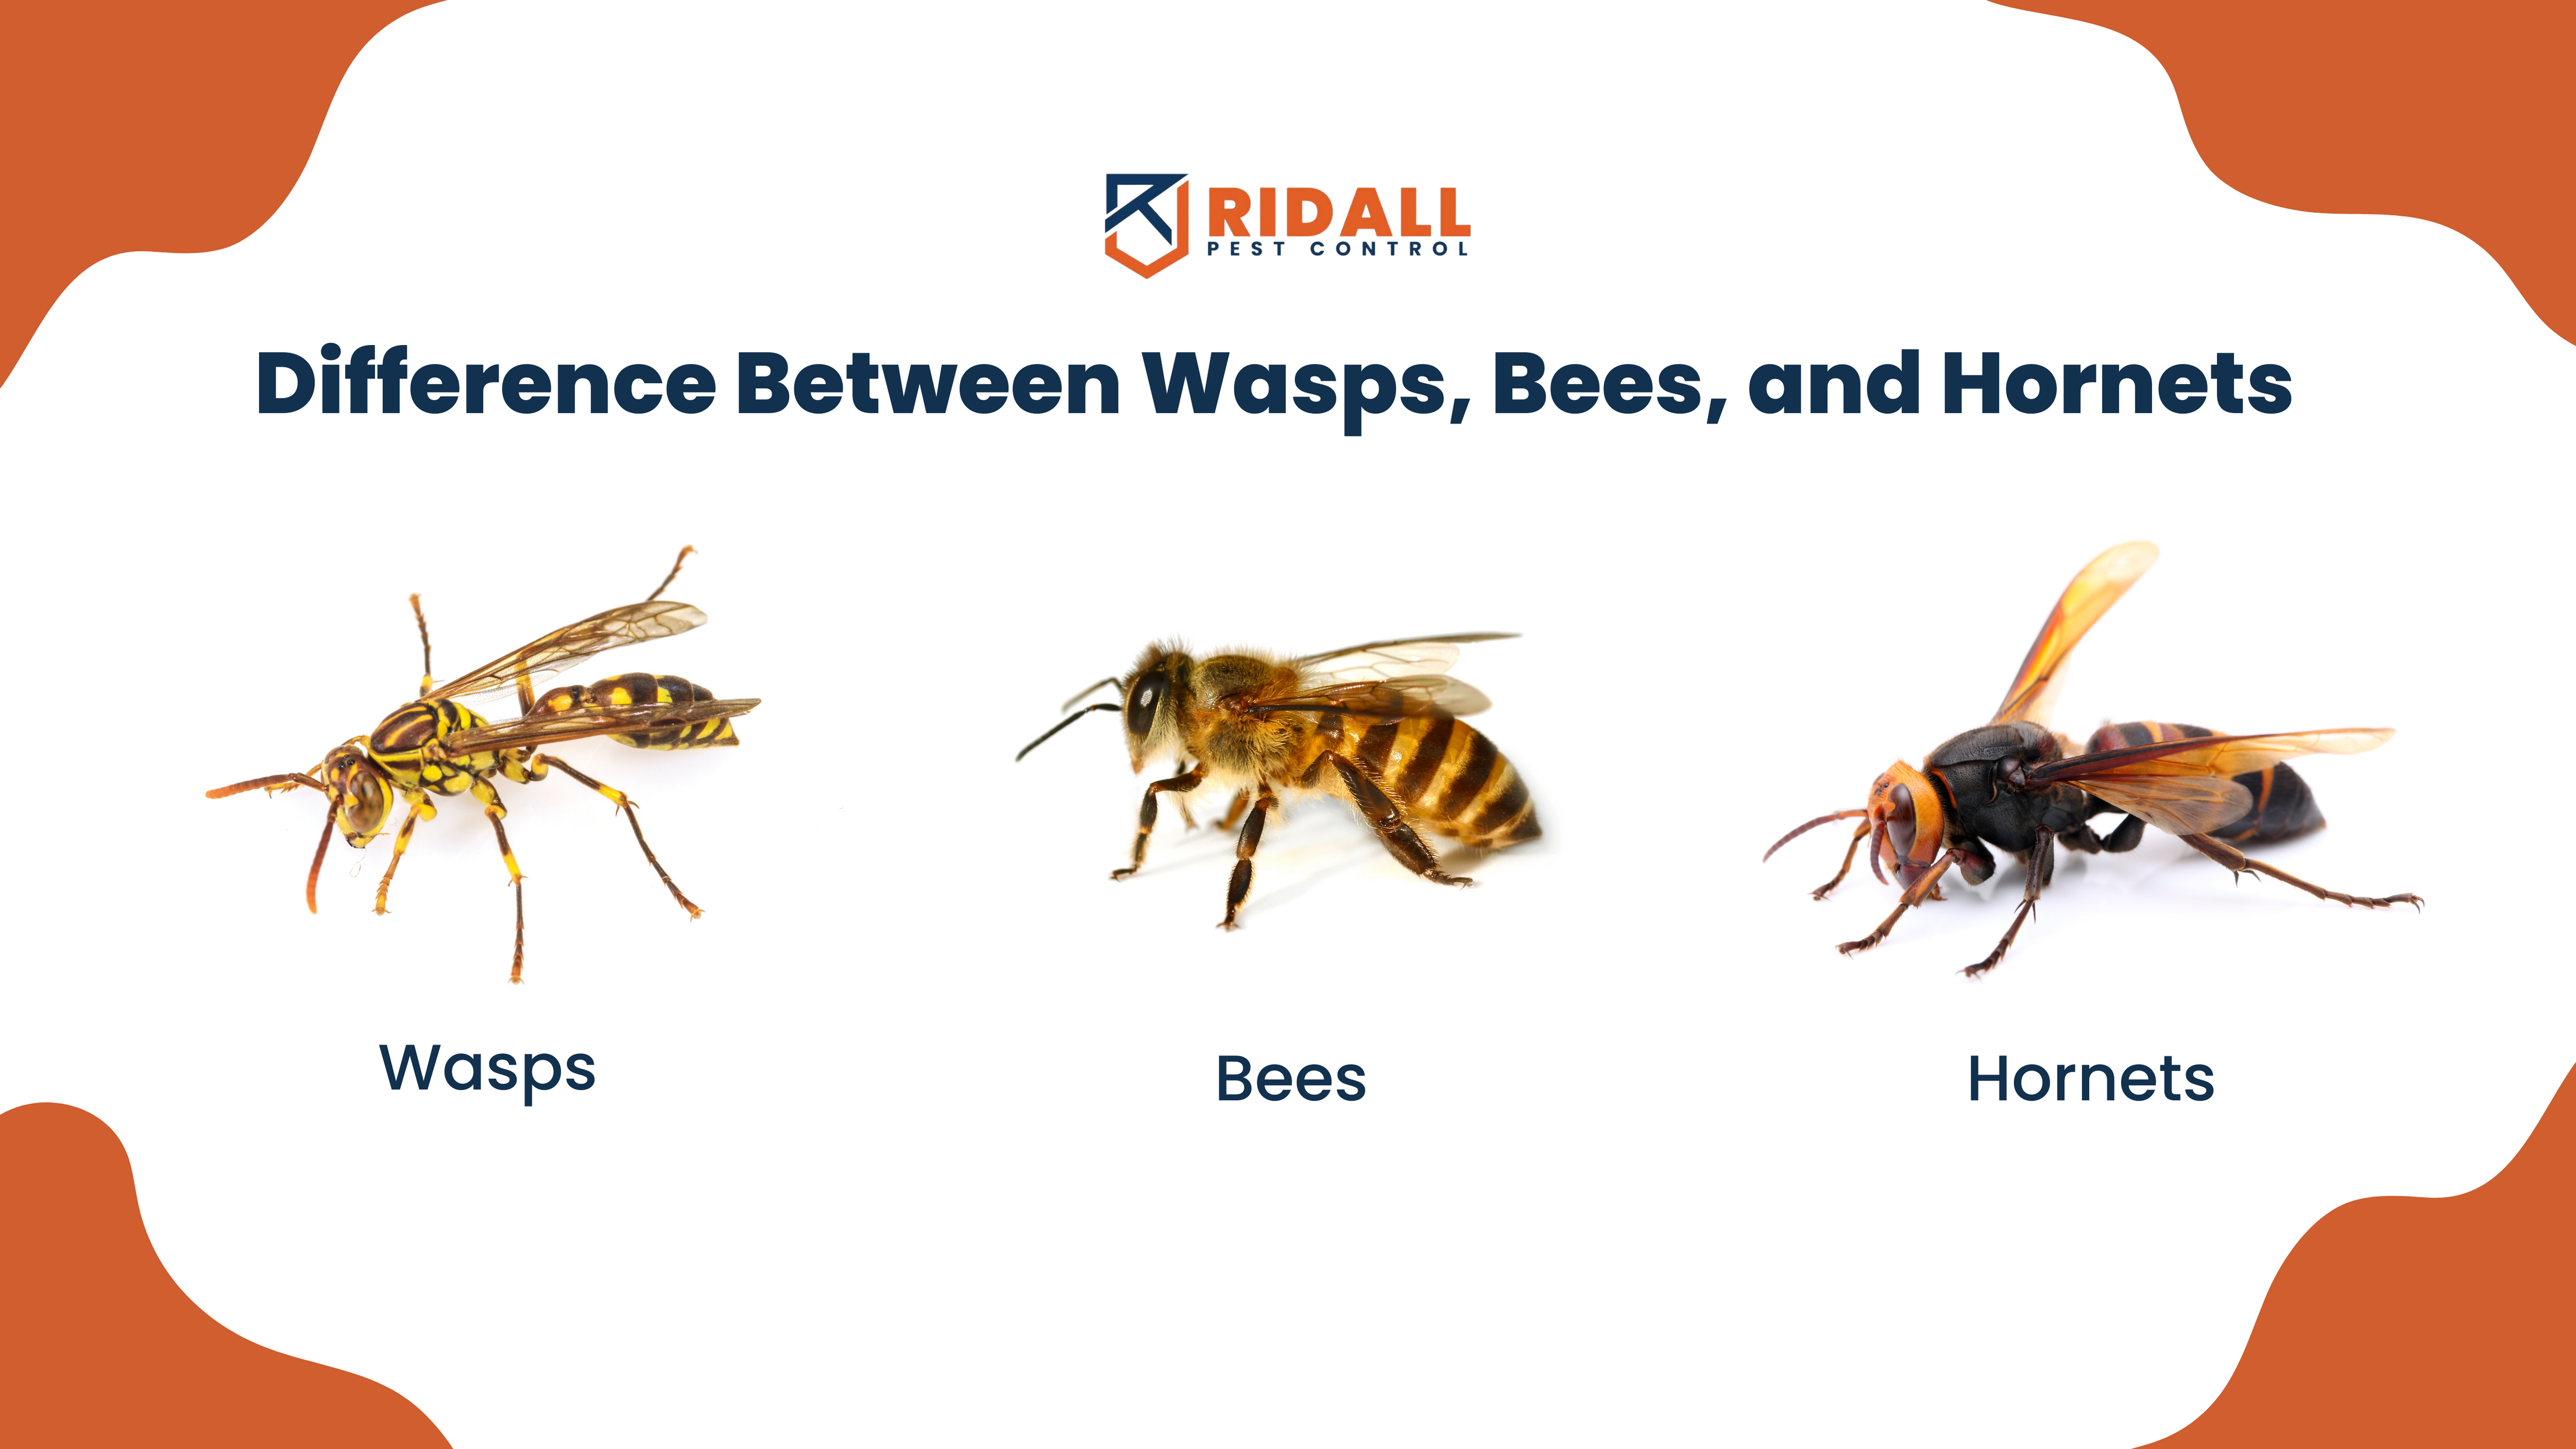 Difference Between Wasps, Bees, and Hornets